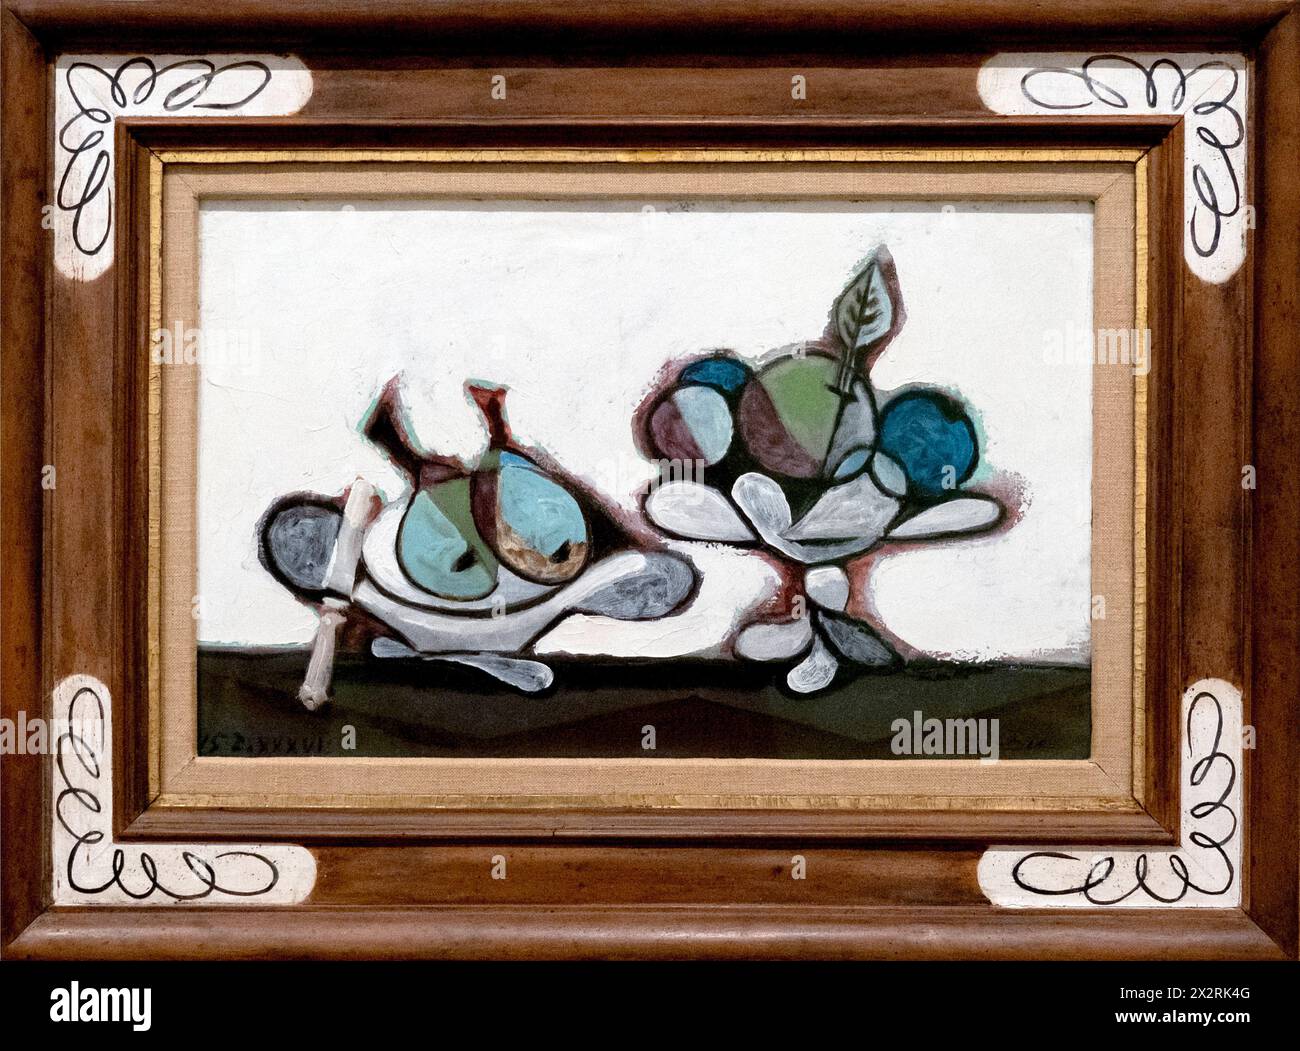 Pablo Picasso oil on canvas painting Dish of Pears 1936 Stock Photo